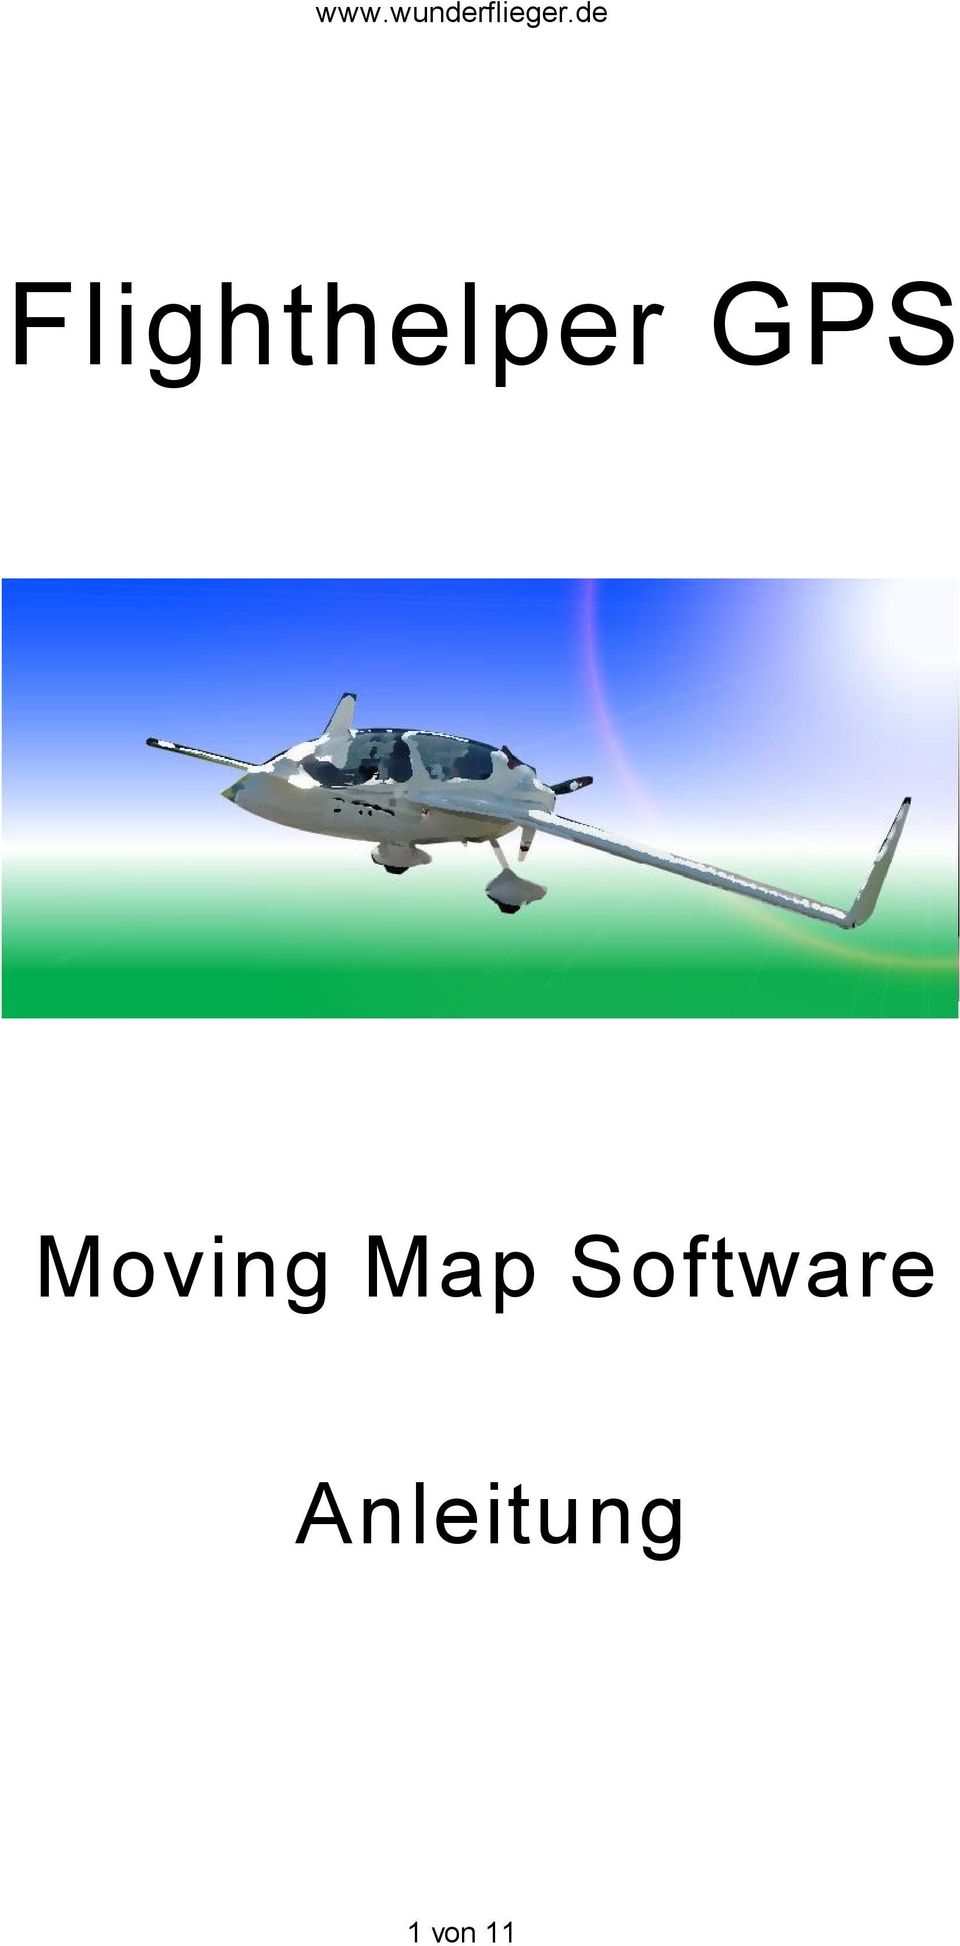 Map Software